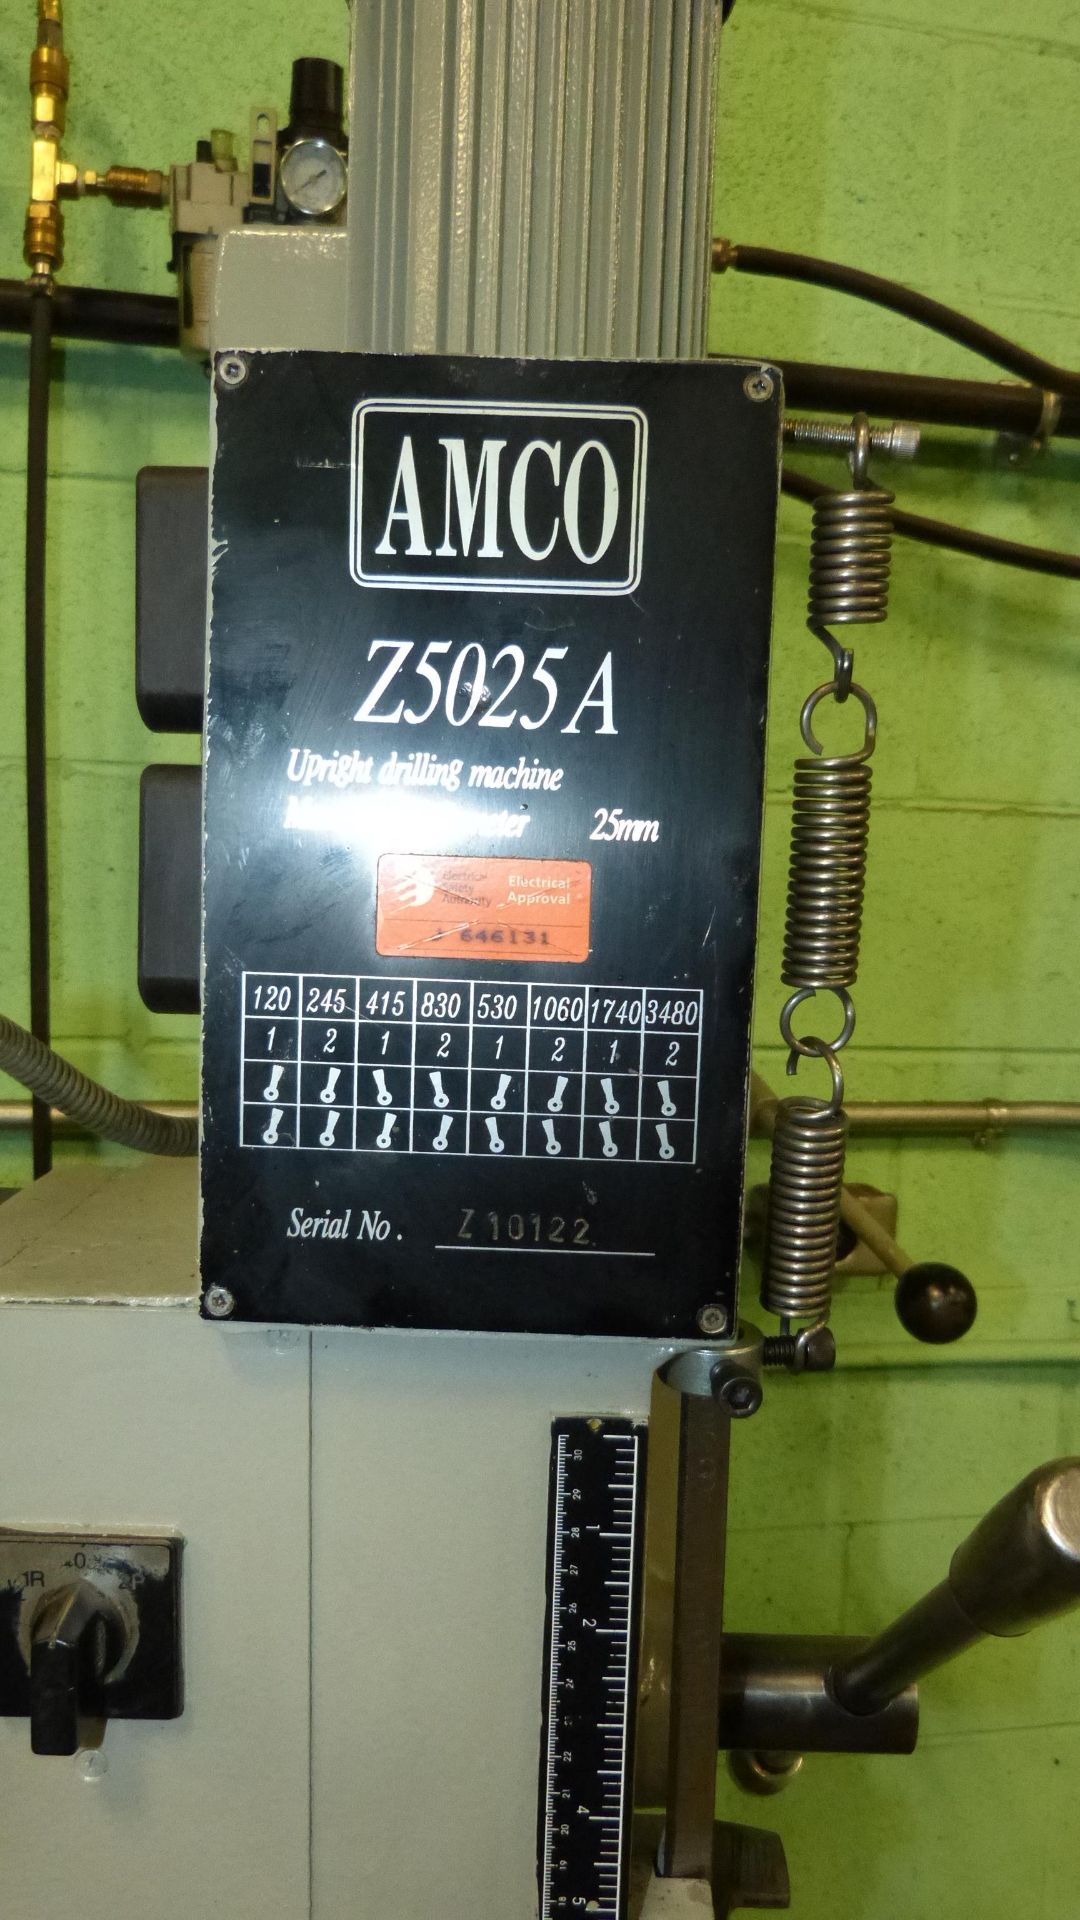 AMCO GEAR HEAD DRILL PRESS, MODEL 25025A, 6'' QUILL TRAVEL - Image 5 of 5